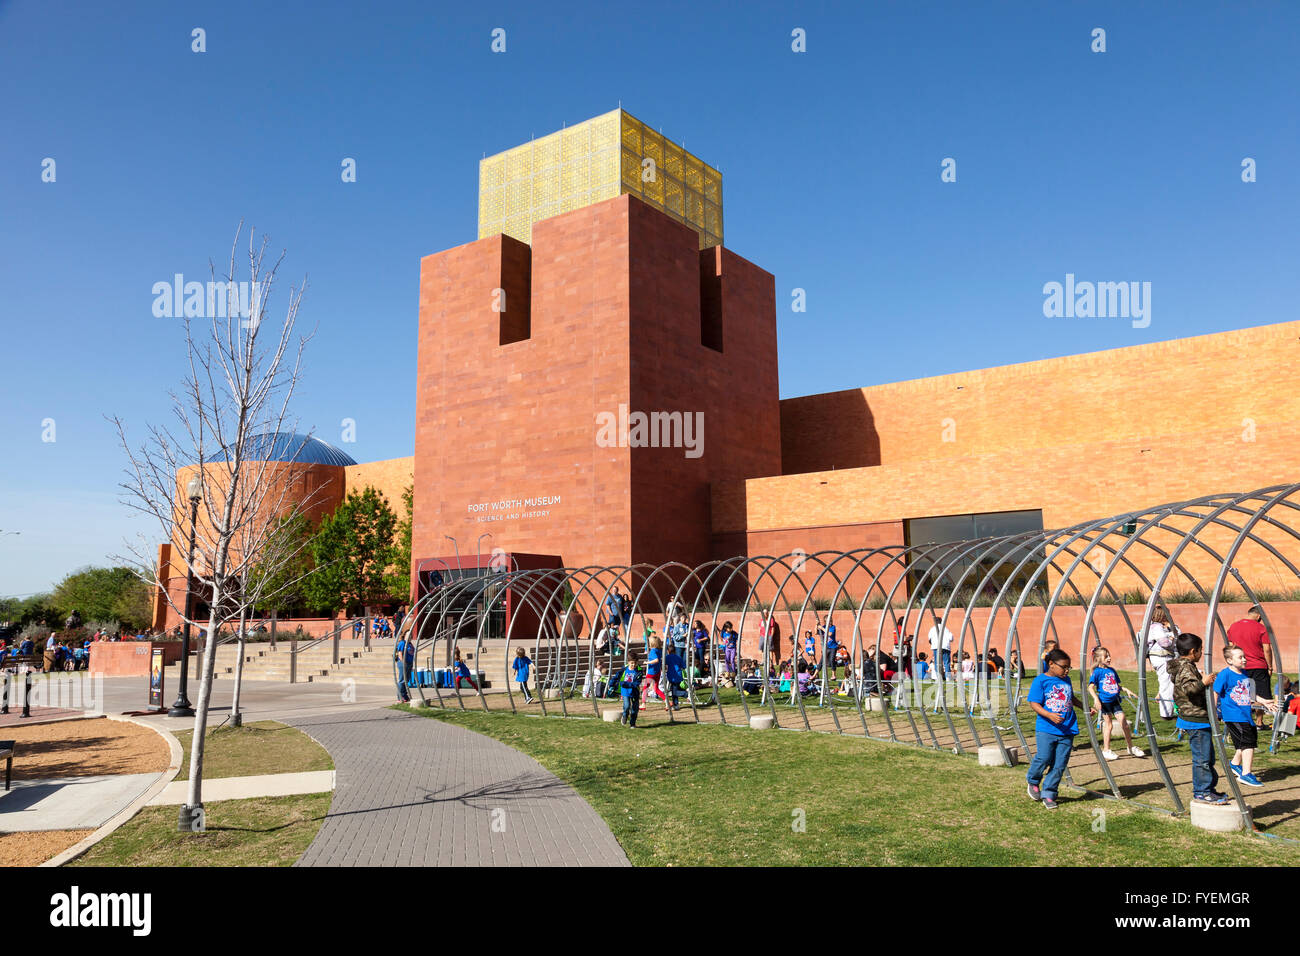 The Fort Worth Museum of Science and History. April 6, 2016 in Fort Worth, Texas, USA Stock Photo